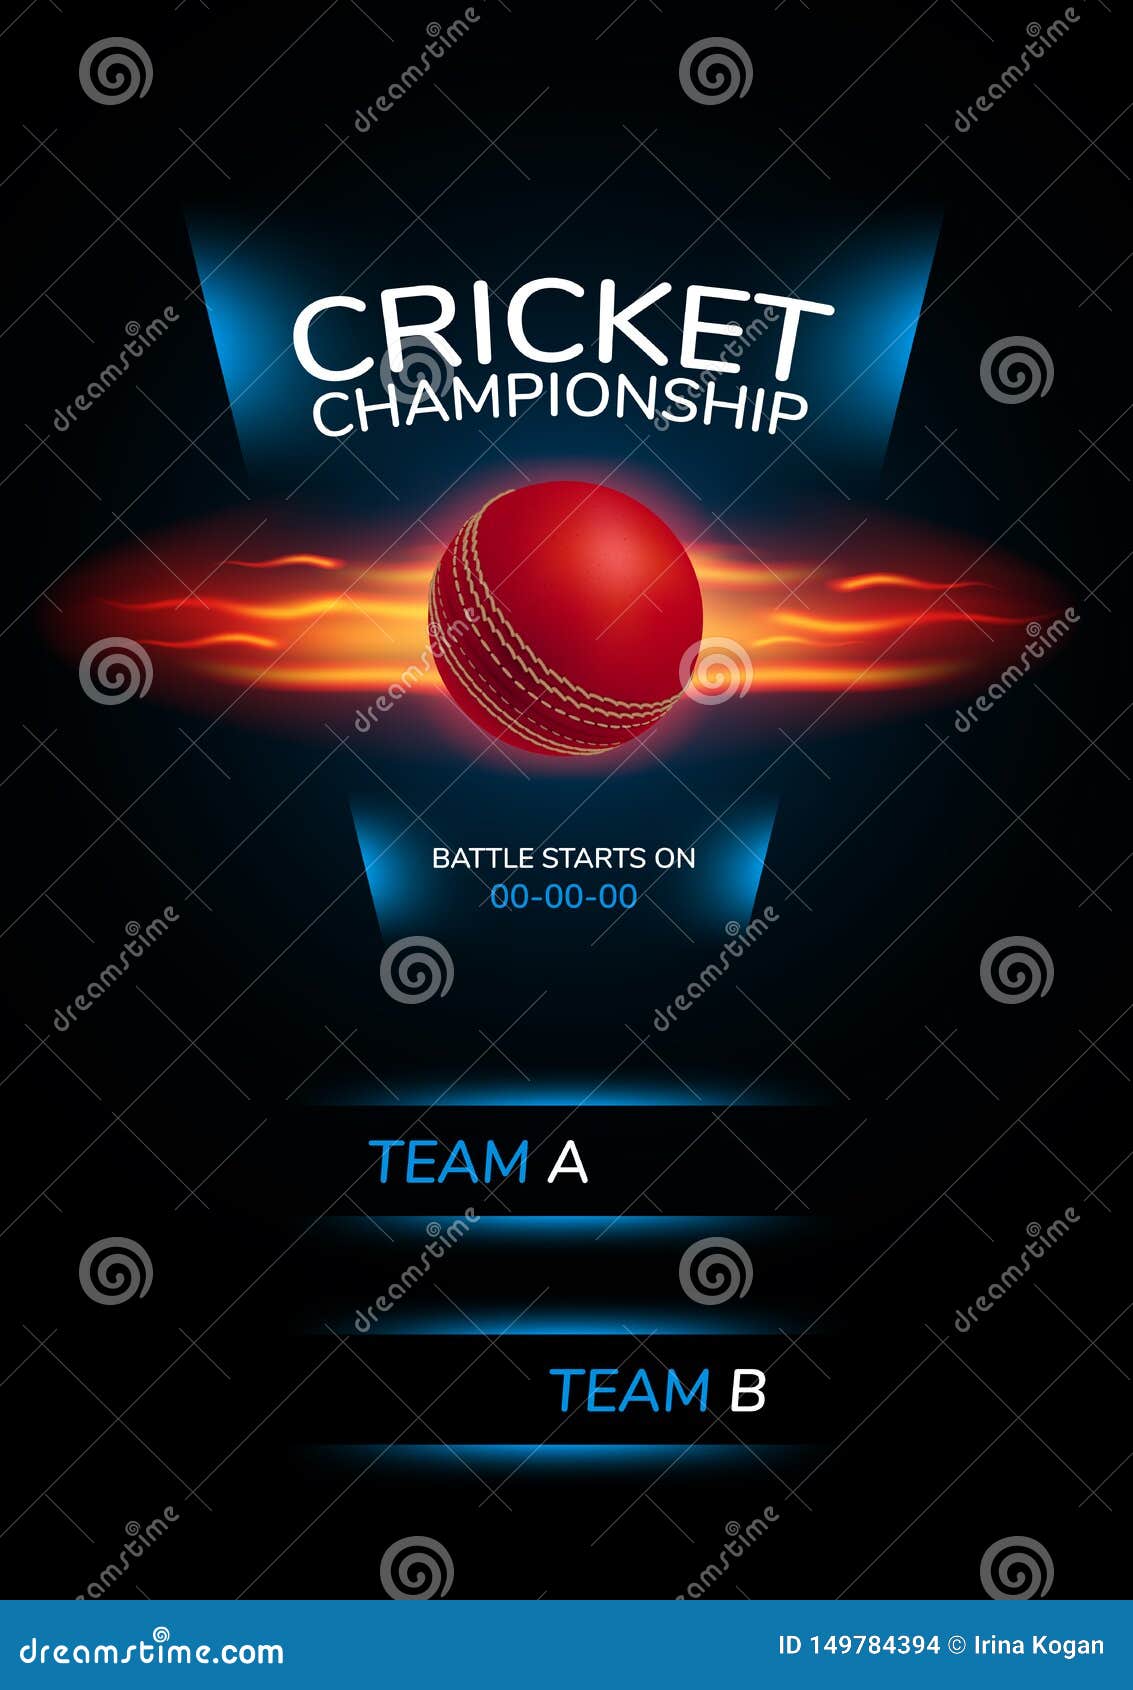 Details 100 cricket background poster - Abzlocal.mx